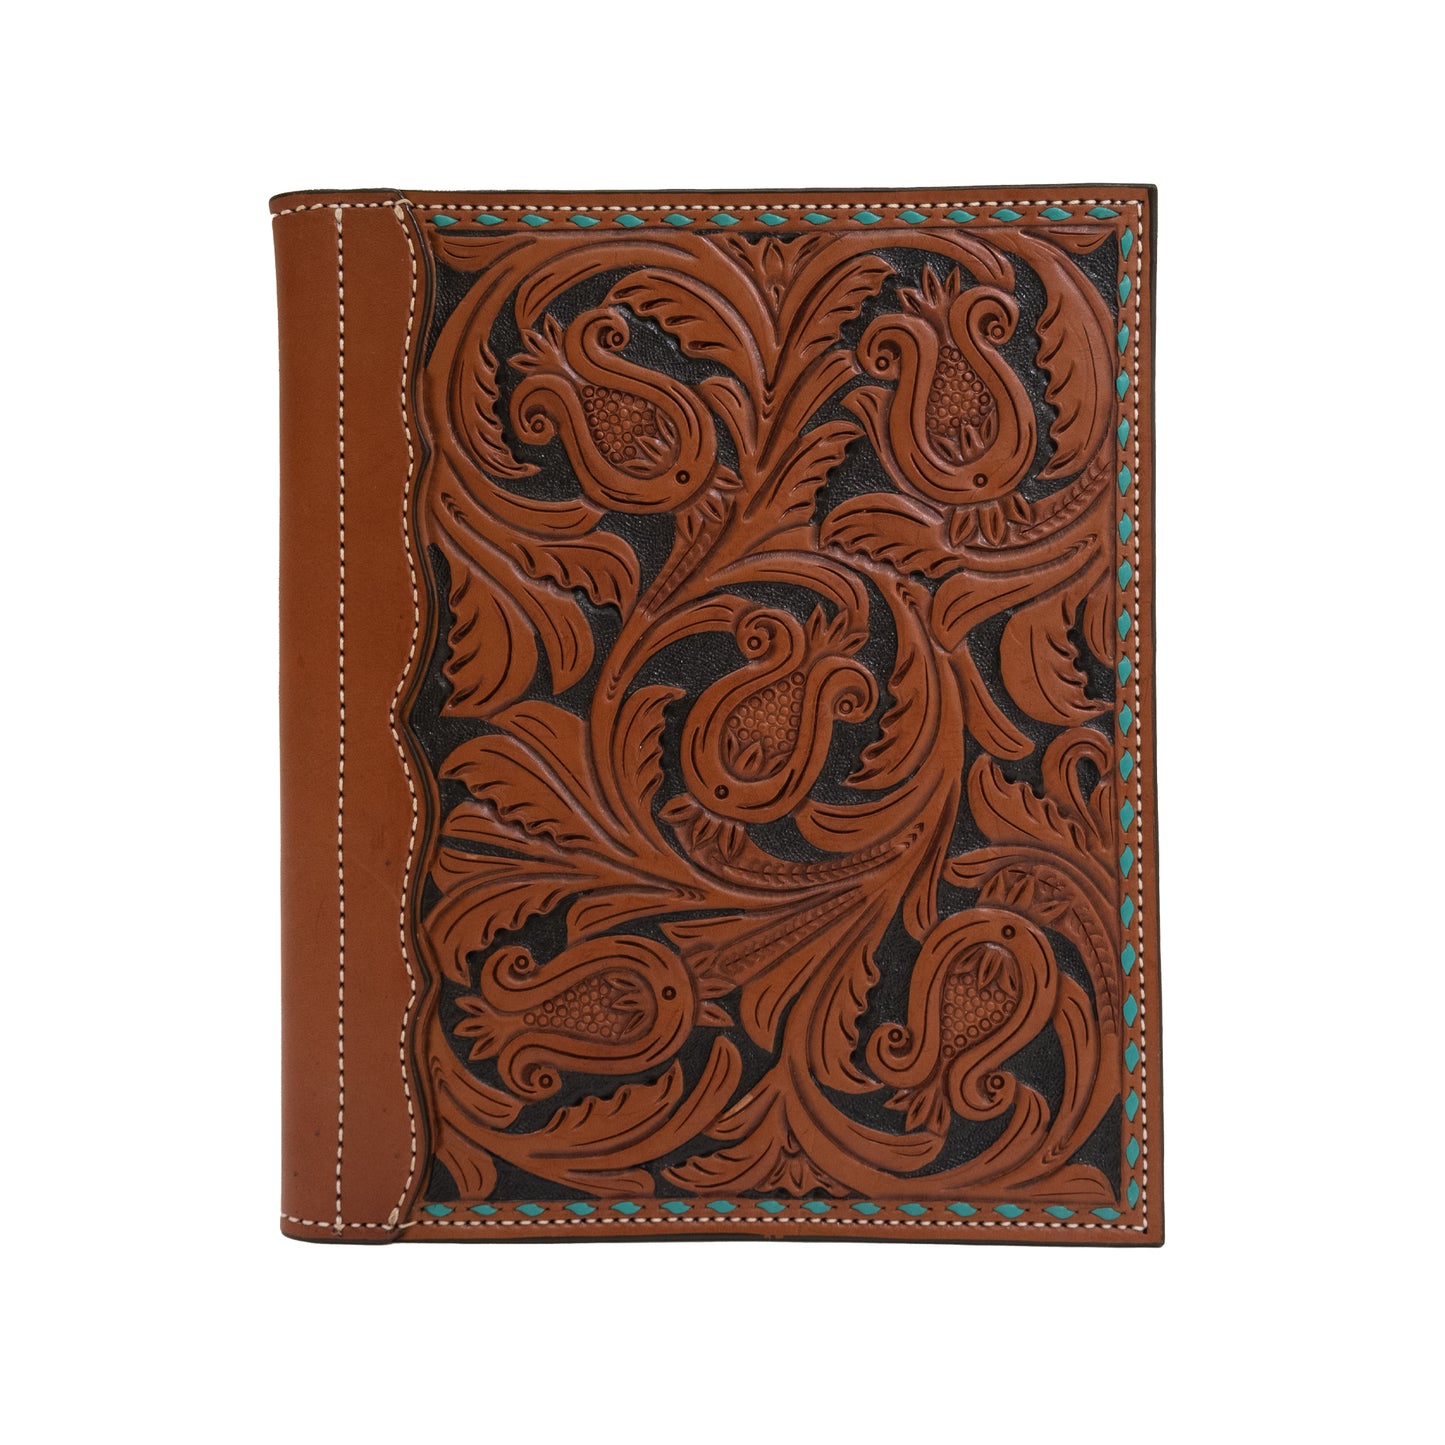 Large portfolio toast leather AA tooling with black background paint, teal buckstitch, and an antique finish. Perfect for any cowboy's or cowgirl's business meeting.